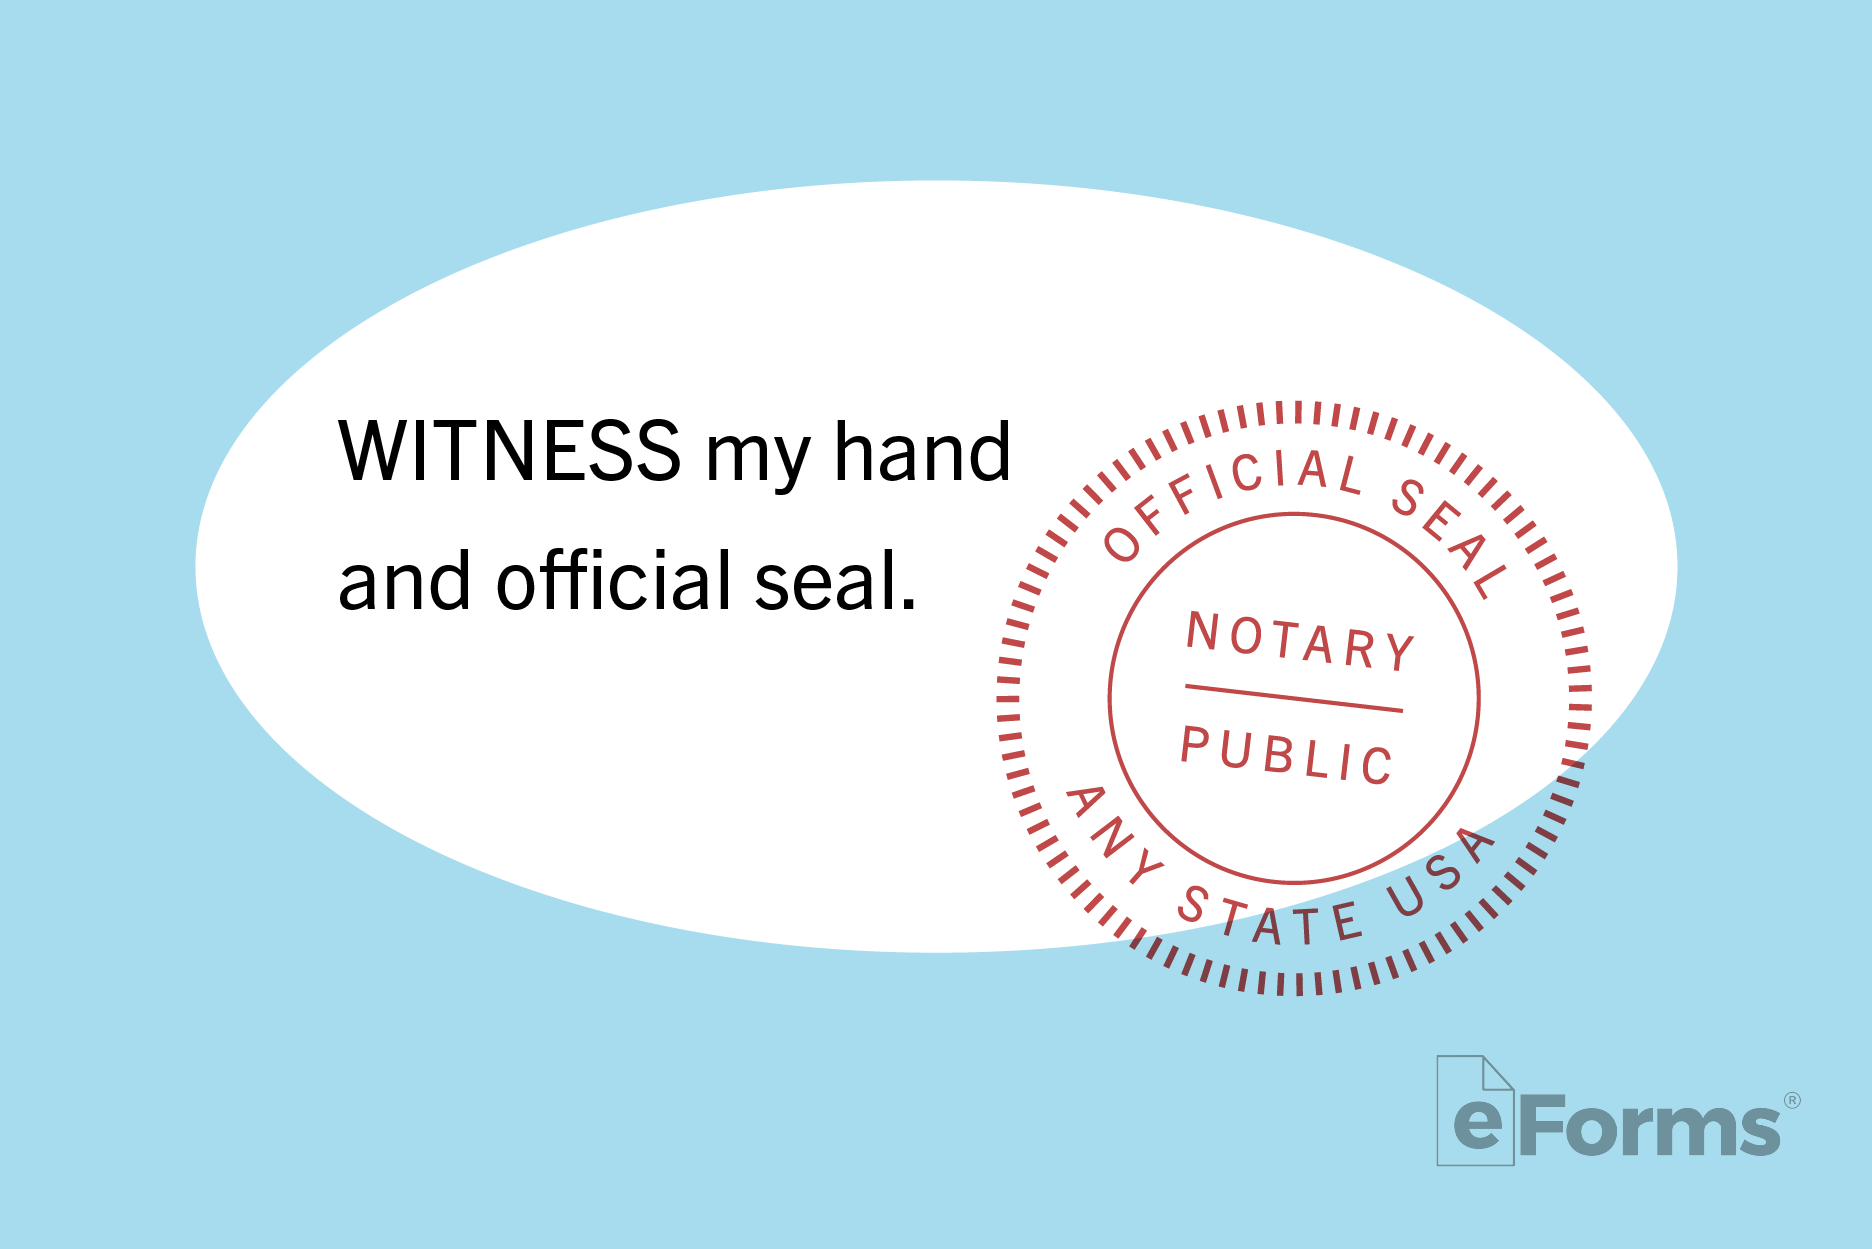 Notary seal/stamp highlighted.